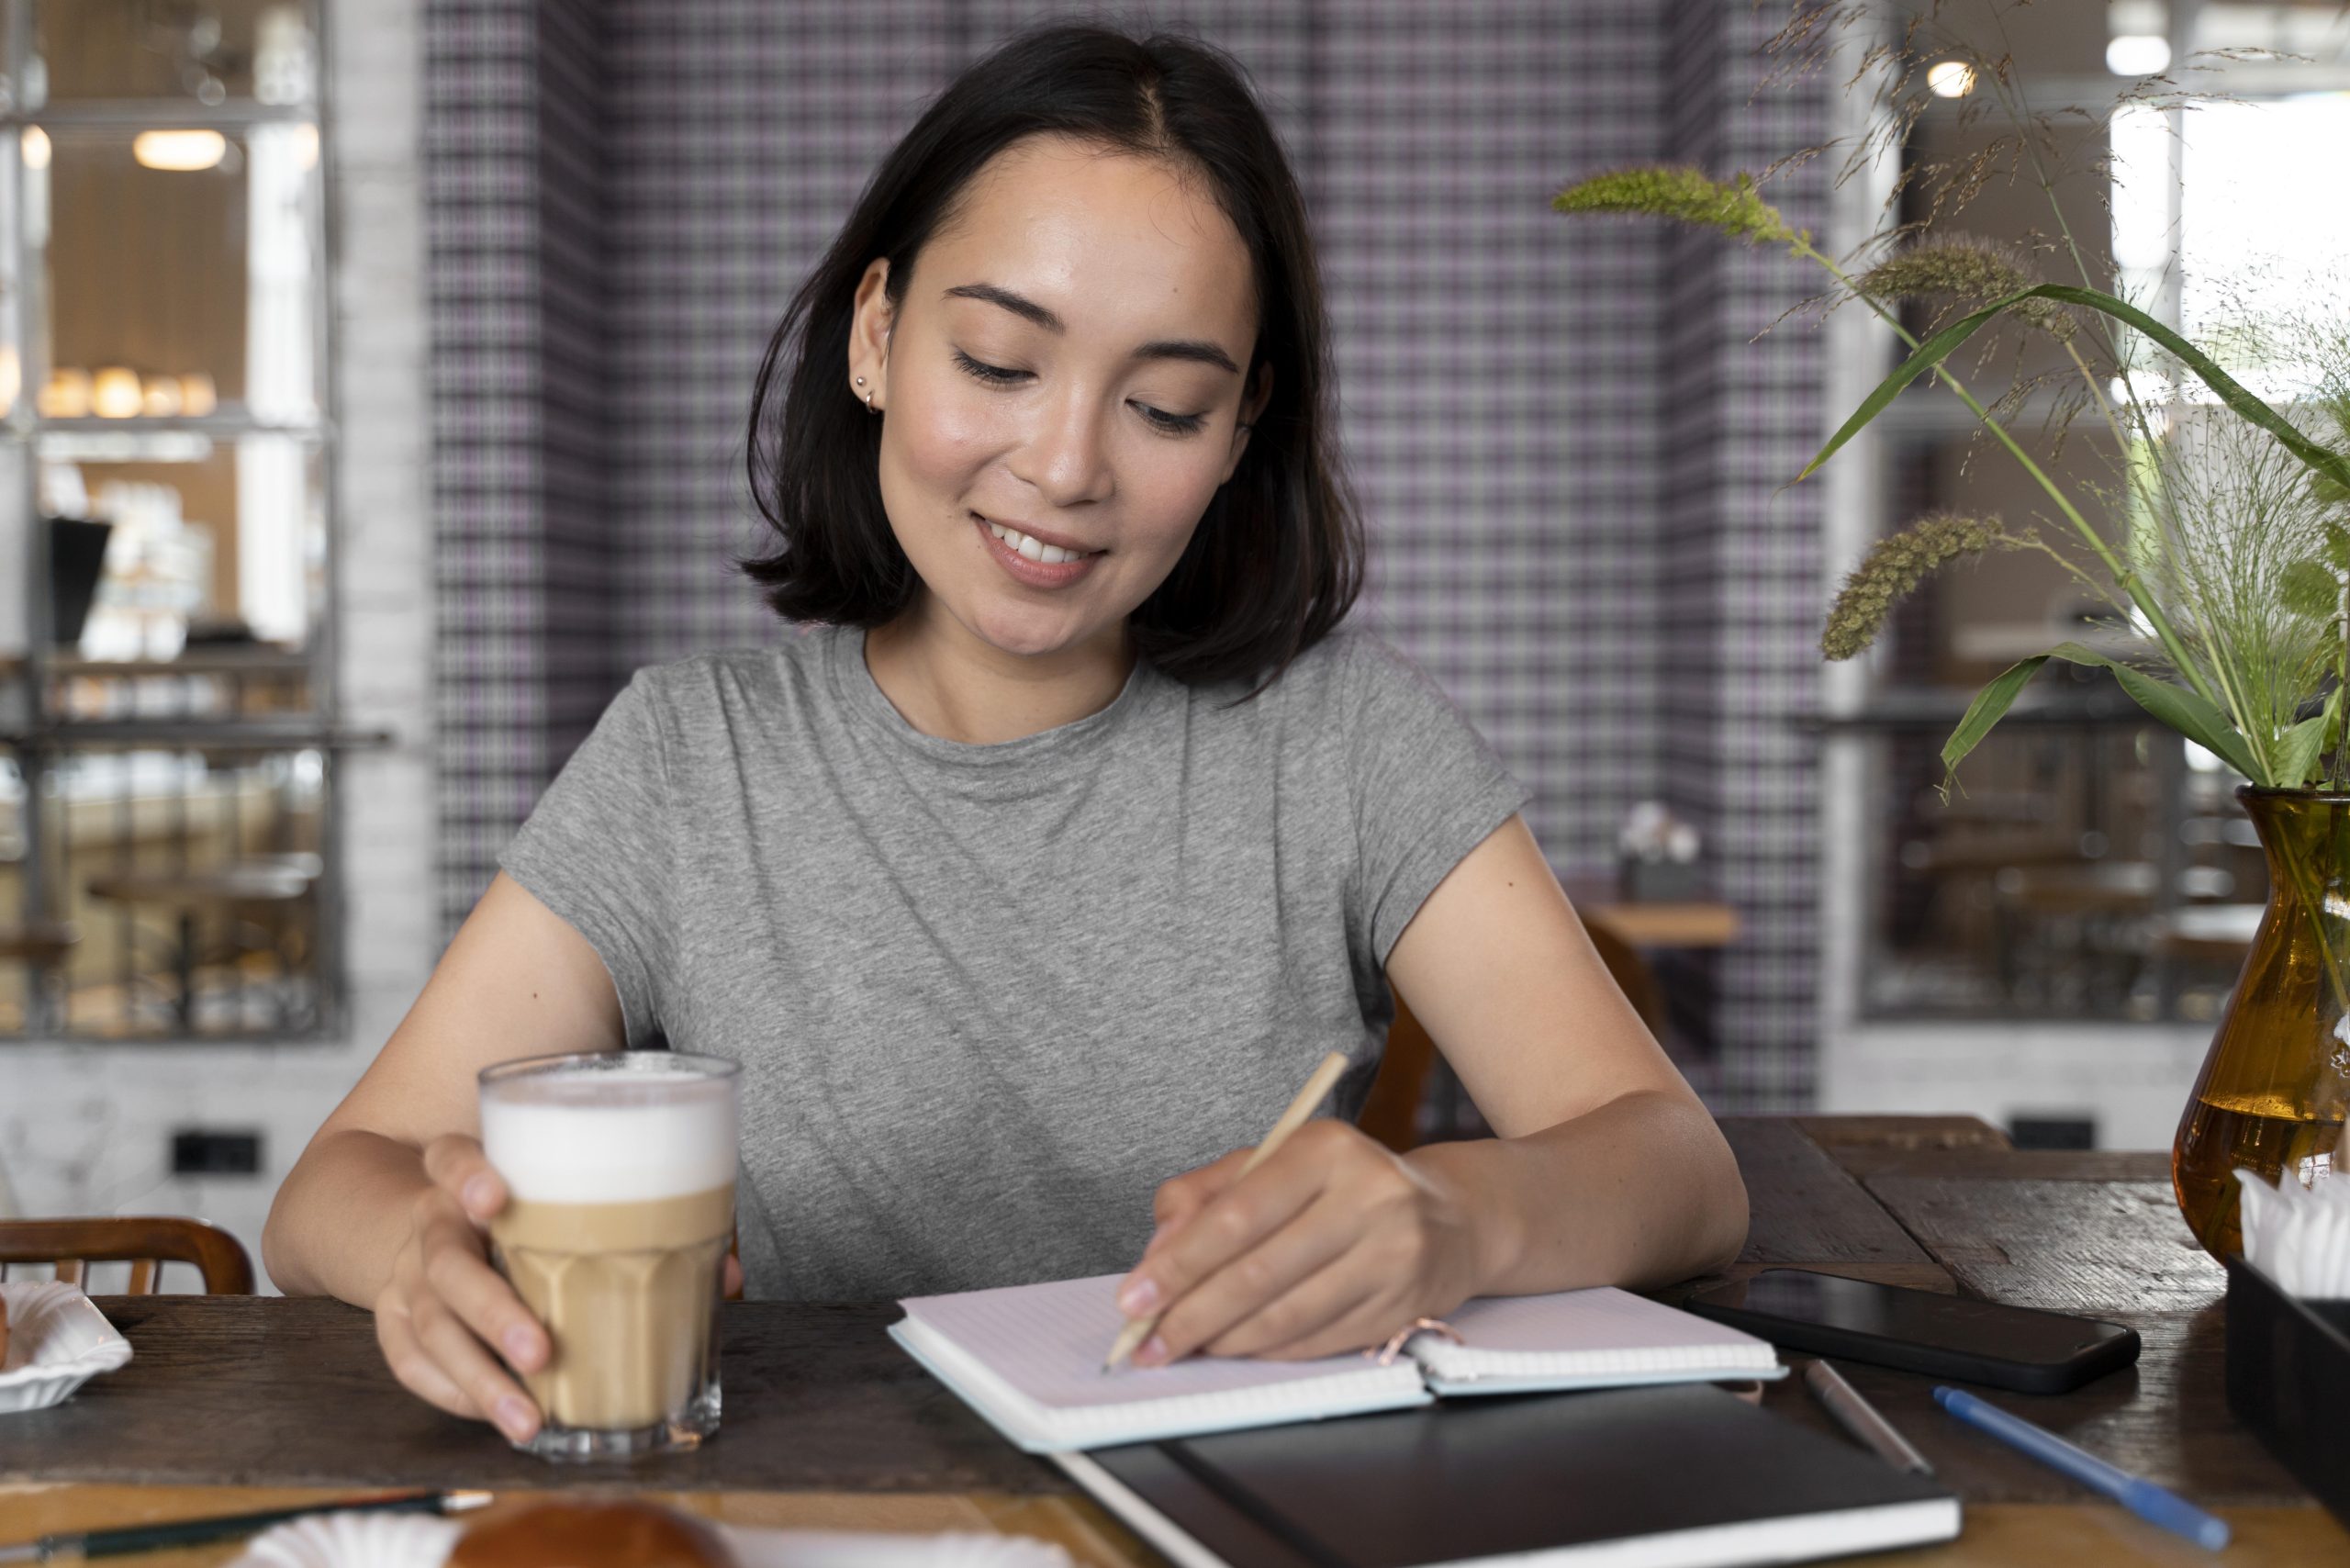 A person smiling with coffee and journalling about how to overcome anxiety.